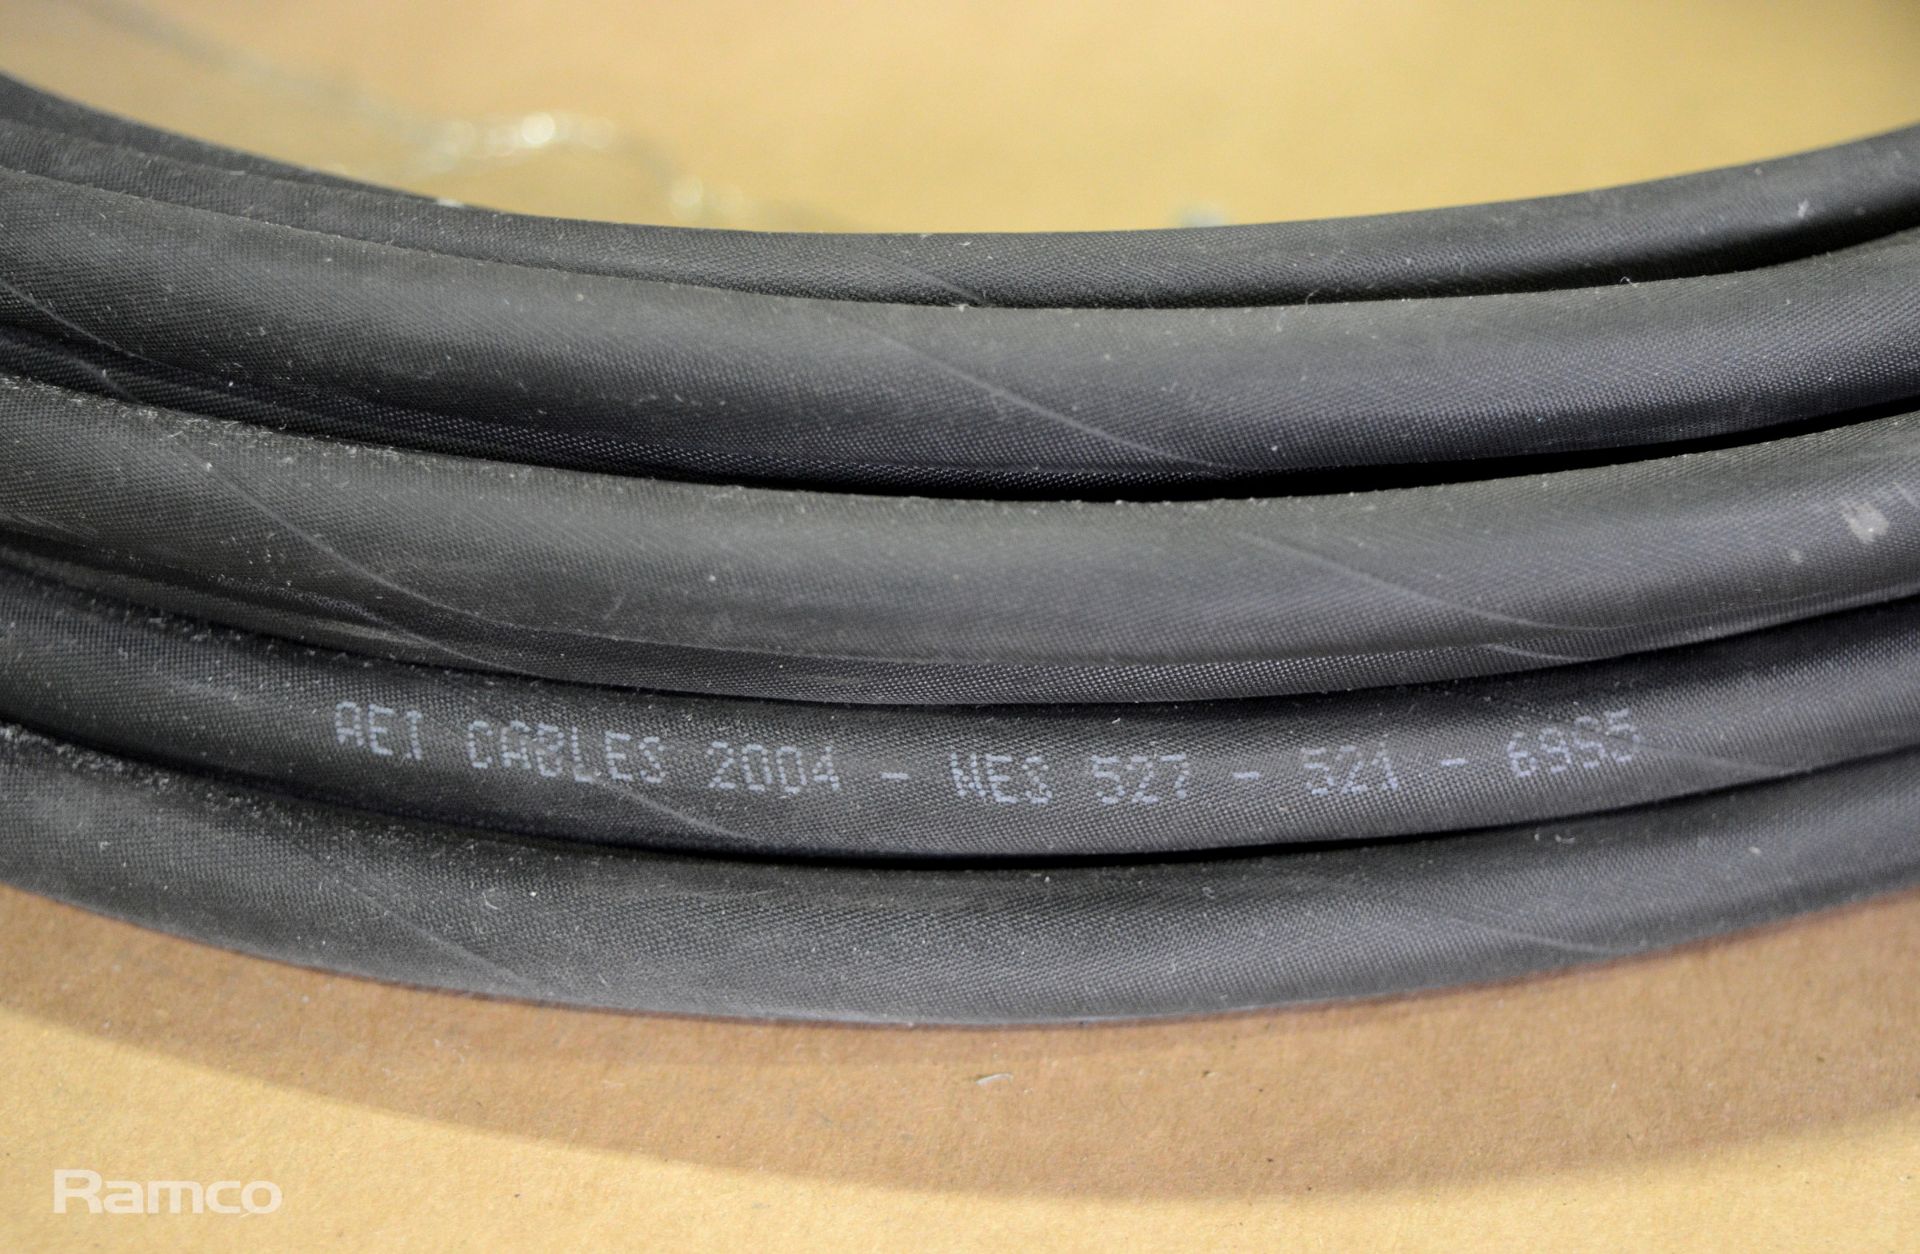 2x Distribution Boxes 220-250V, 12 Metre Electrical Cable, Various Types Of Electrical Cables - Image 6 of 6